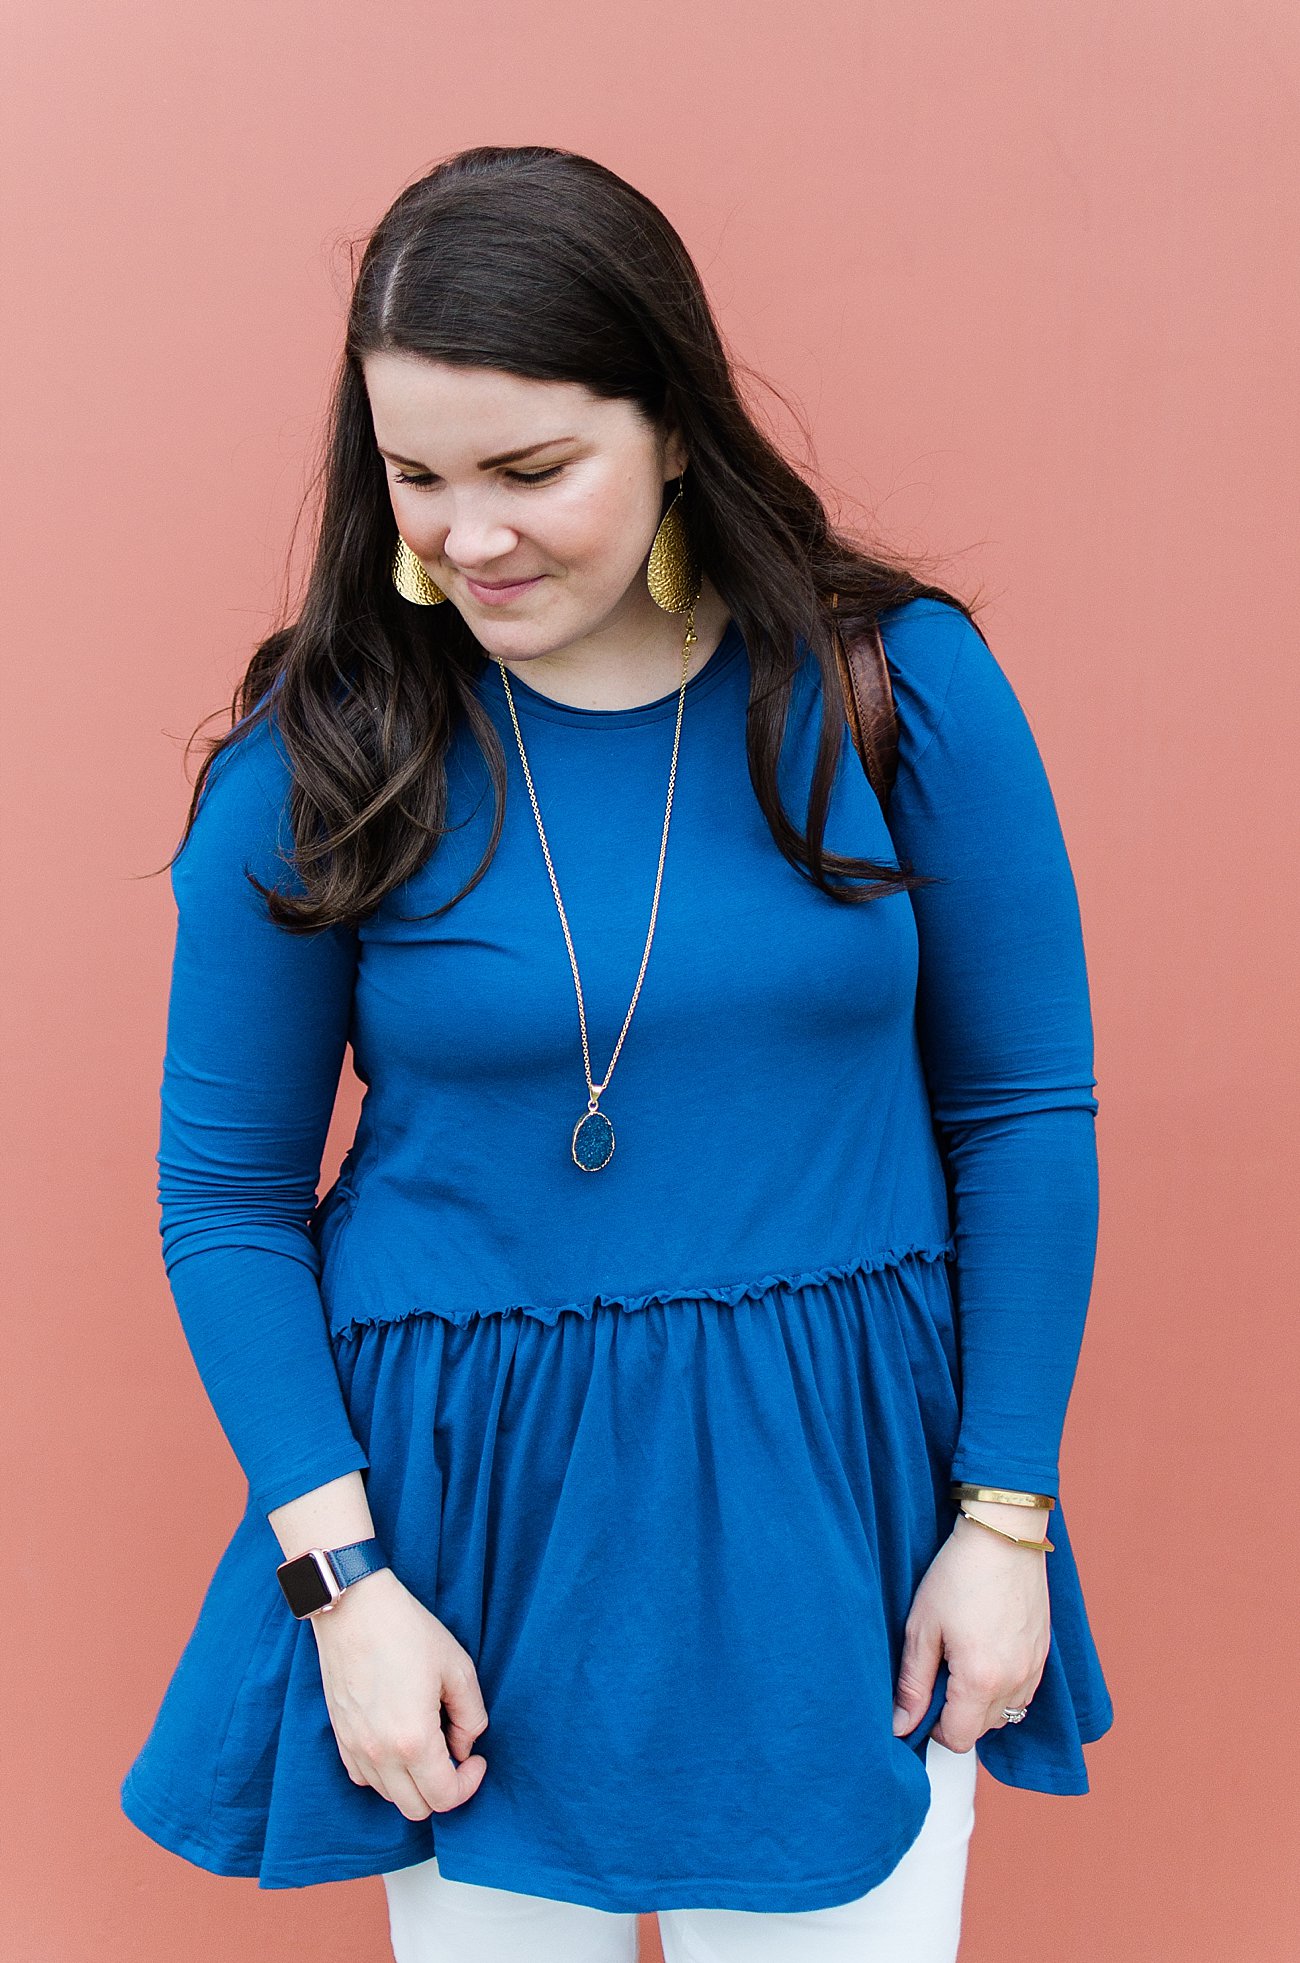 Ethical fashion blogger - Elegantees tunic, The Root Collective Espe booties, Matr Boomie Druzy Drop Necklace, JOYN bag, Malia Designs wallet - Fair Trade Fashion (2) - The Recent Lessons Learned by popular North Carolina ethical fashion blogger Still Being Molly